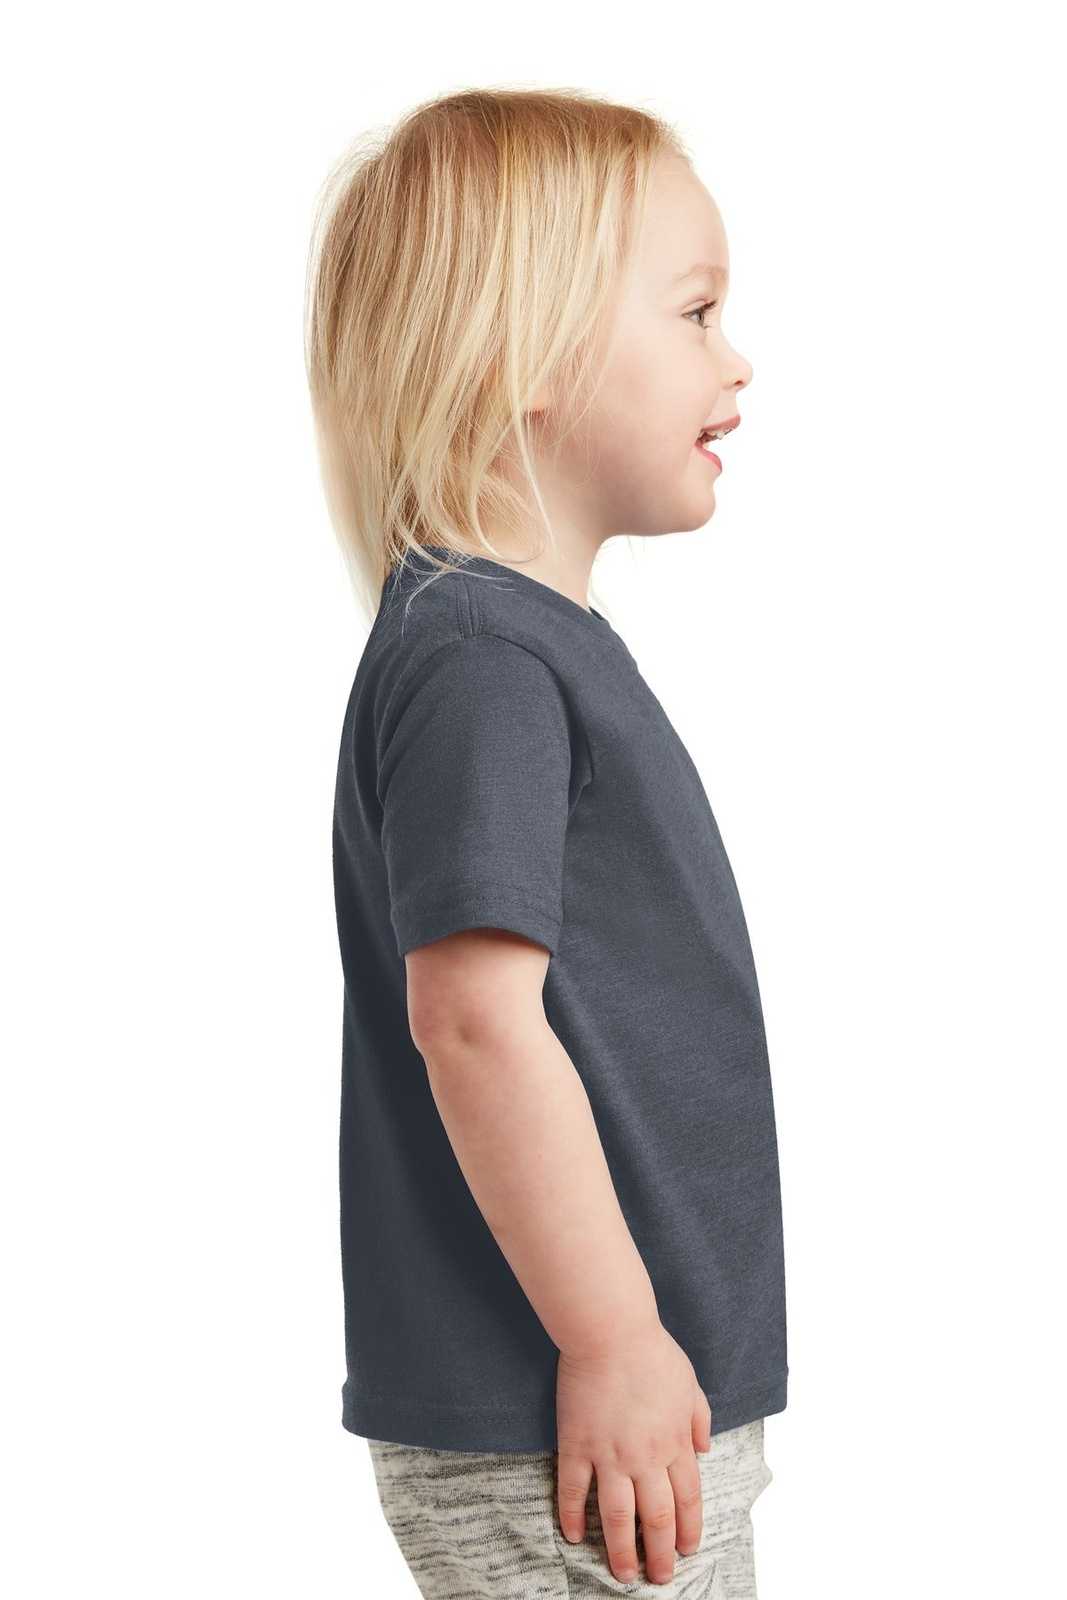 Rabbit Skins 3321 Toddler Fine Jersey Tee - Vintage Navy - HIT a Double